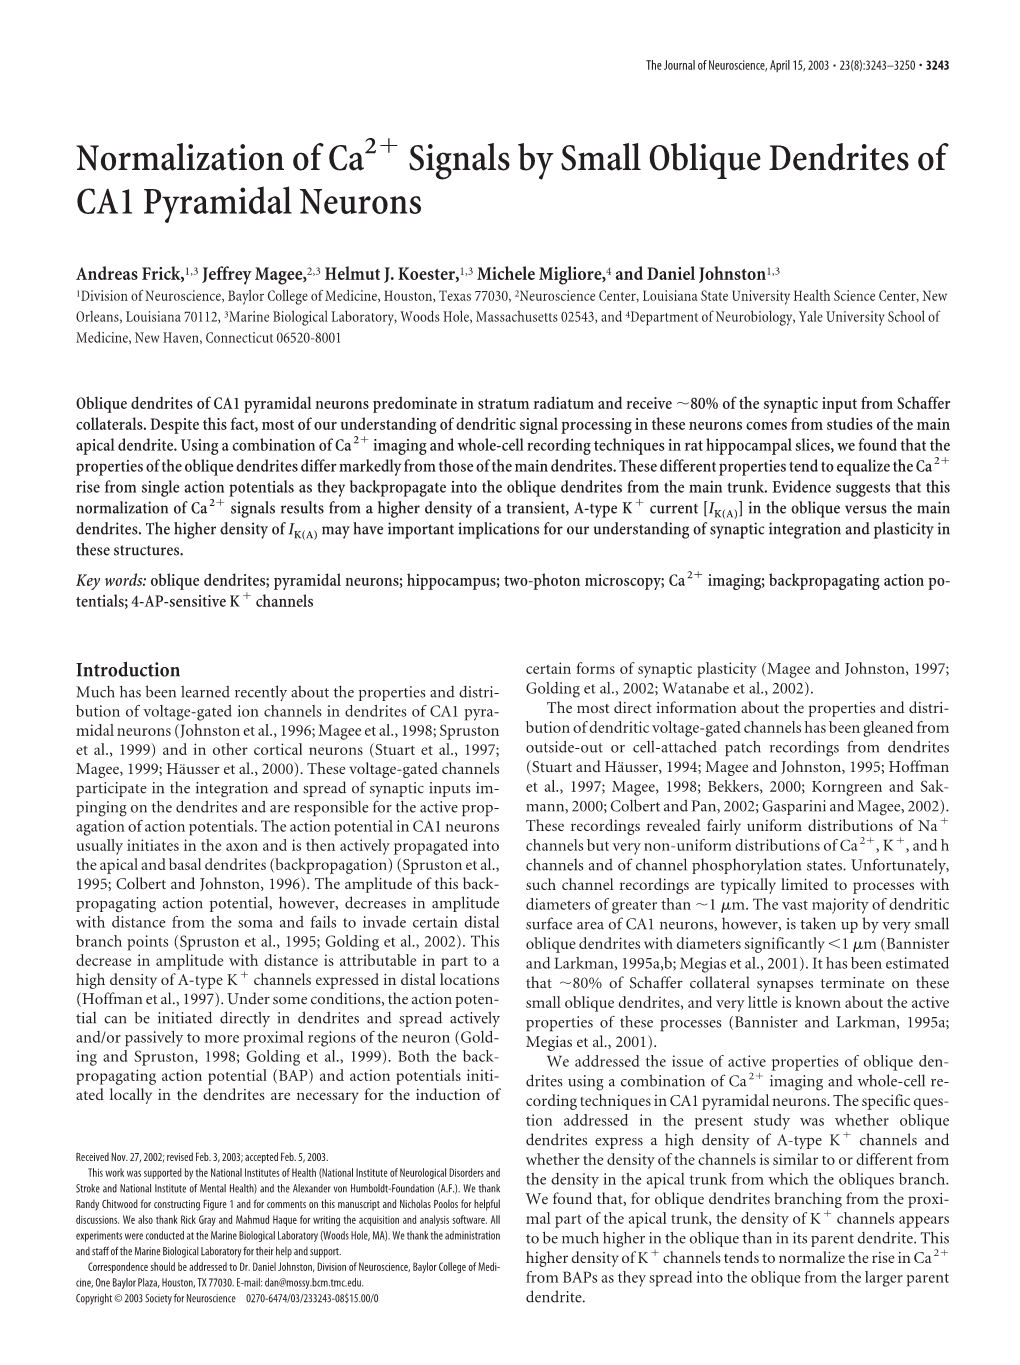 Normalization of Ca2 Signals by Small Oblique Dendrites of CA1 Pyramidal Neurons